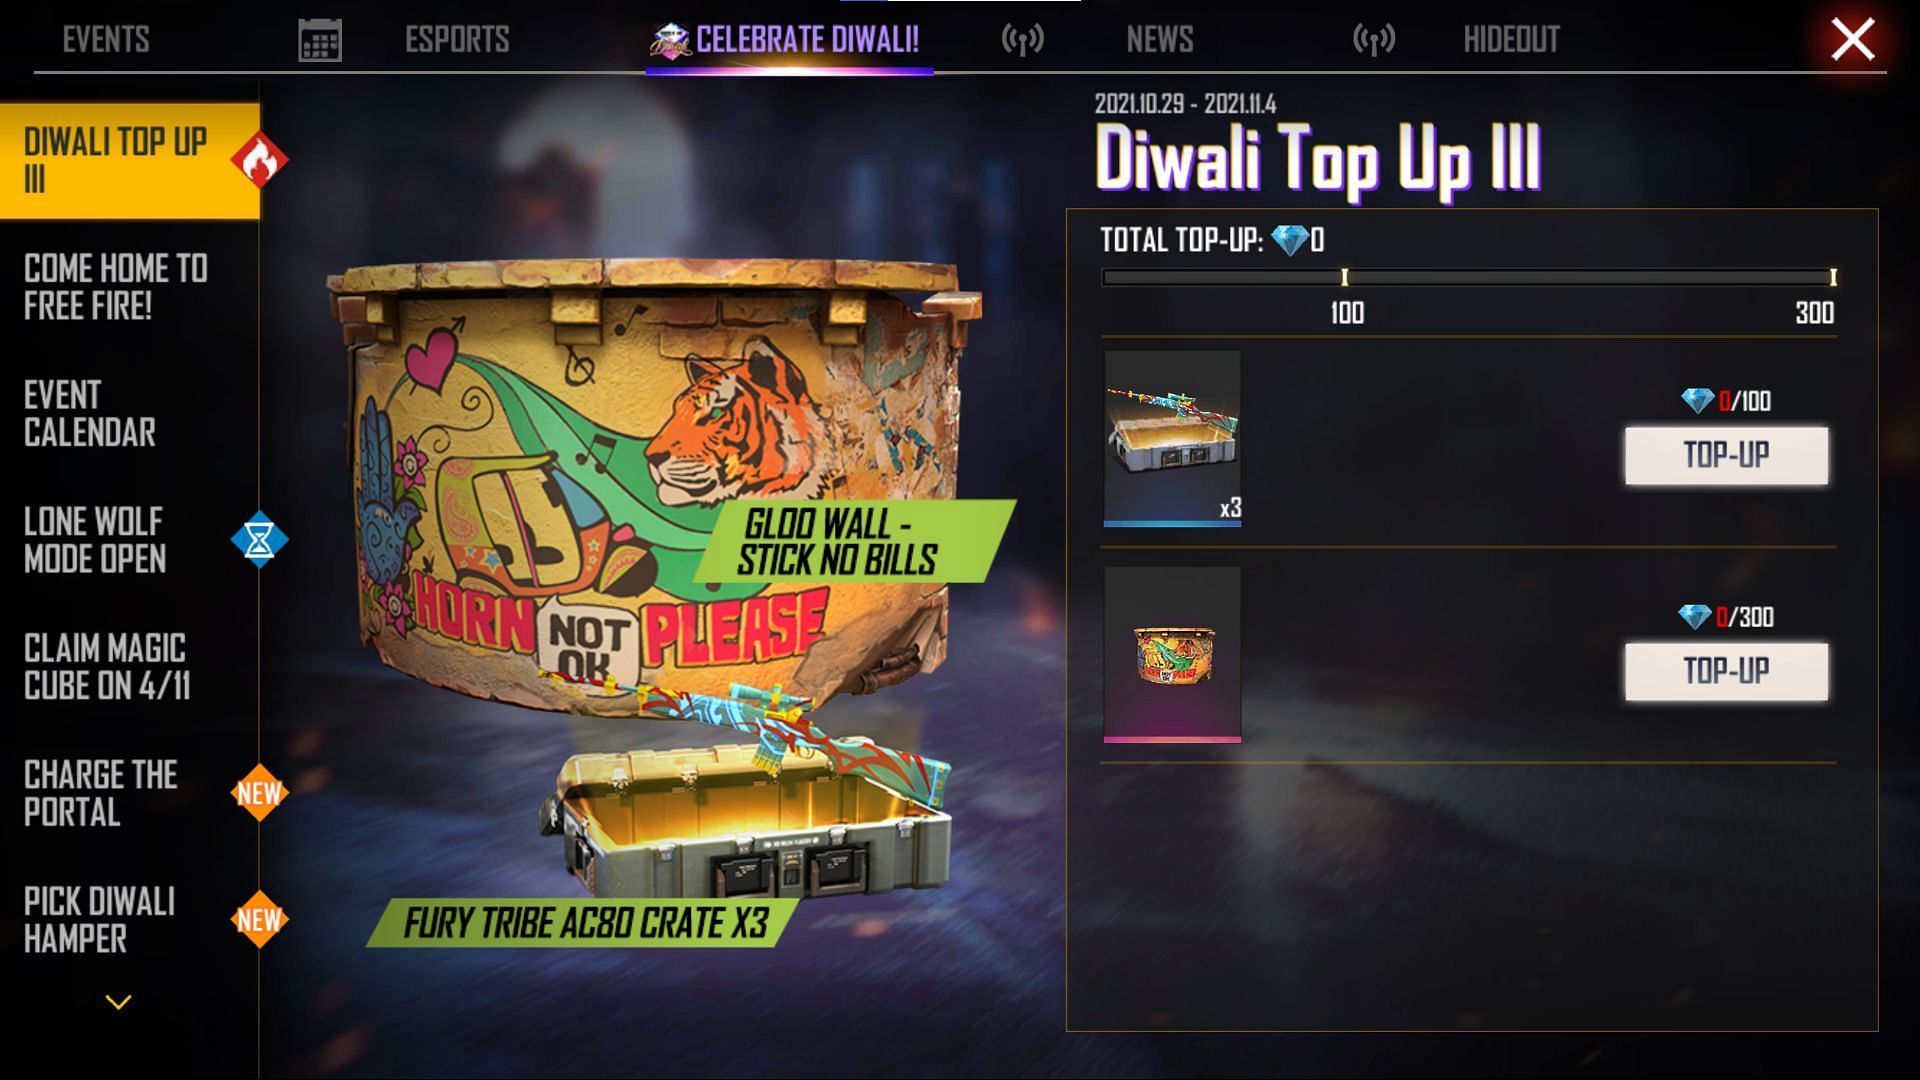 The Diwali Top Up 3 event (Image via Free Fire)